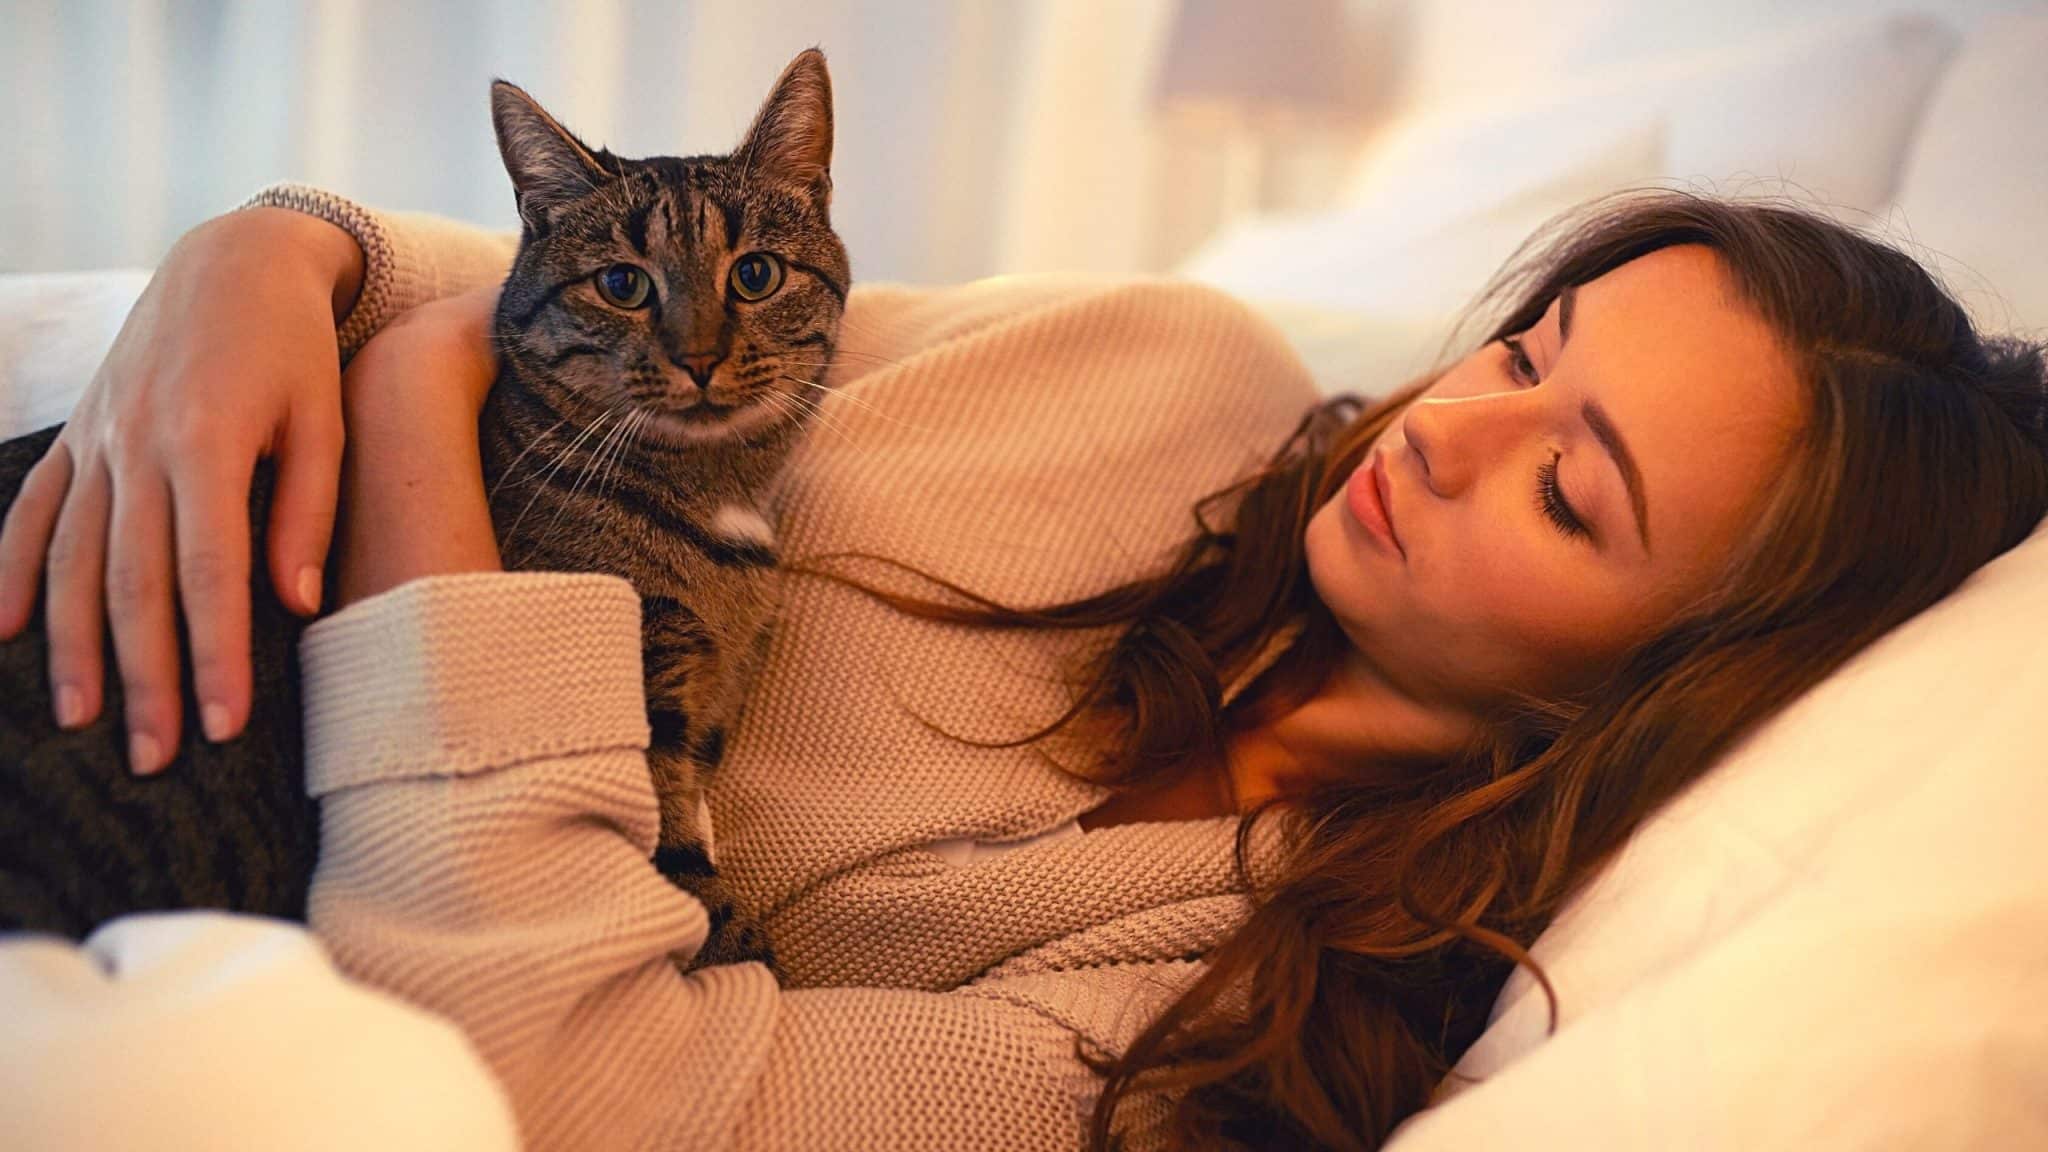 woman on the bed with cat